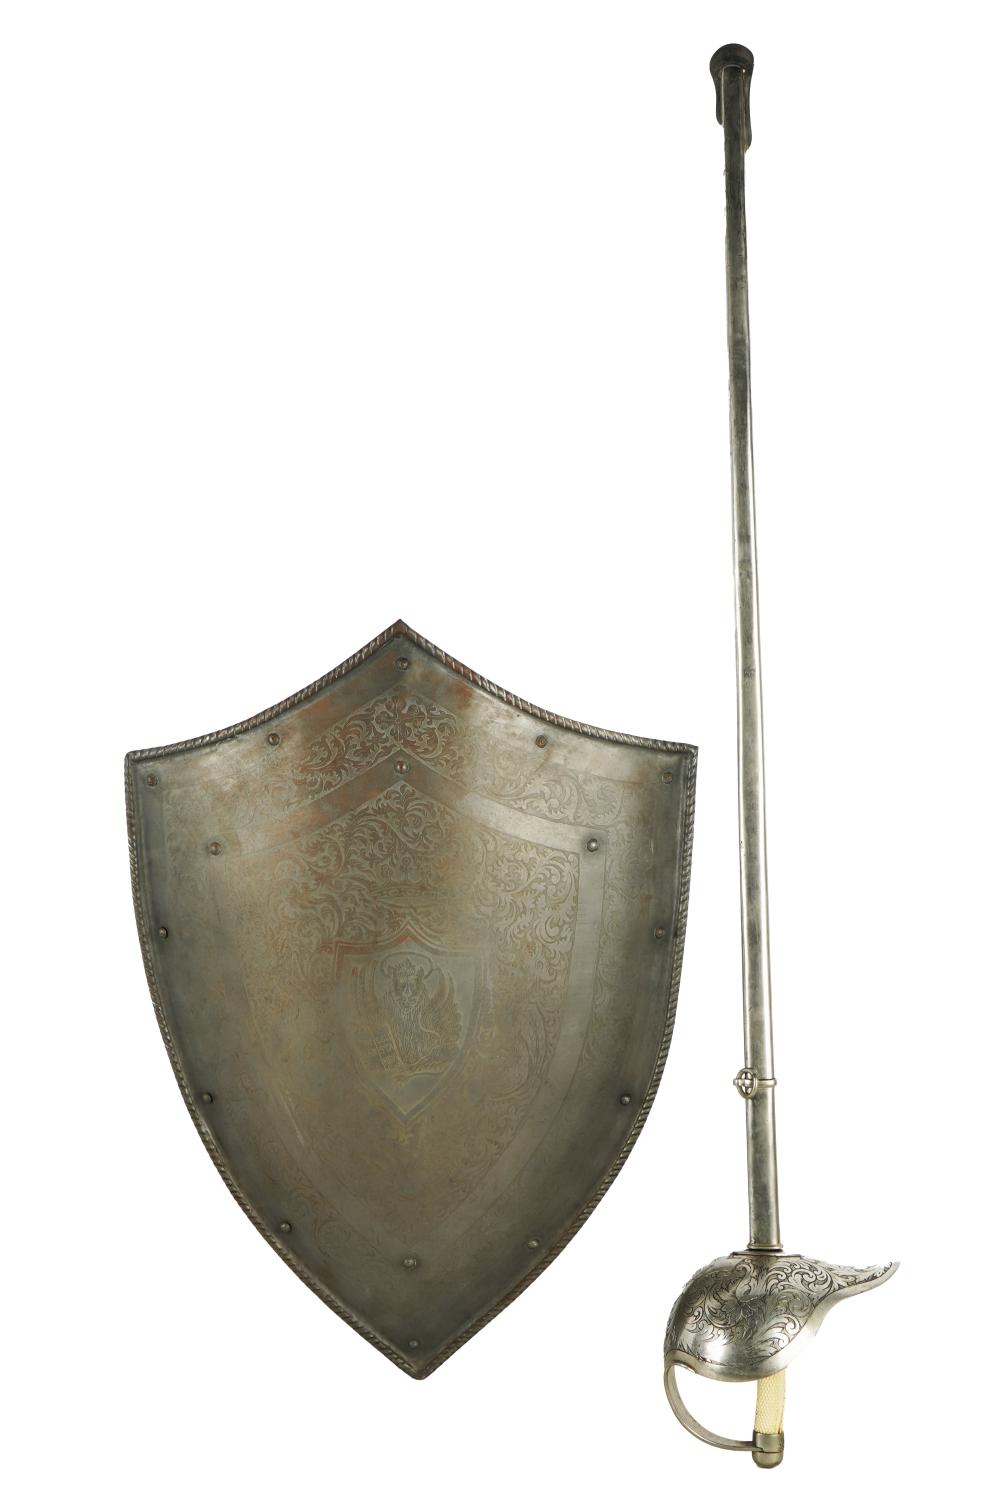 RAPIER WITH SHIELDshield with the 33264d